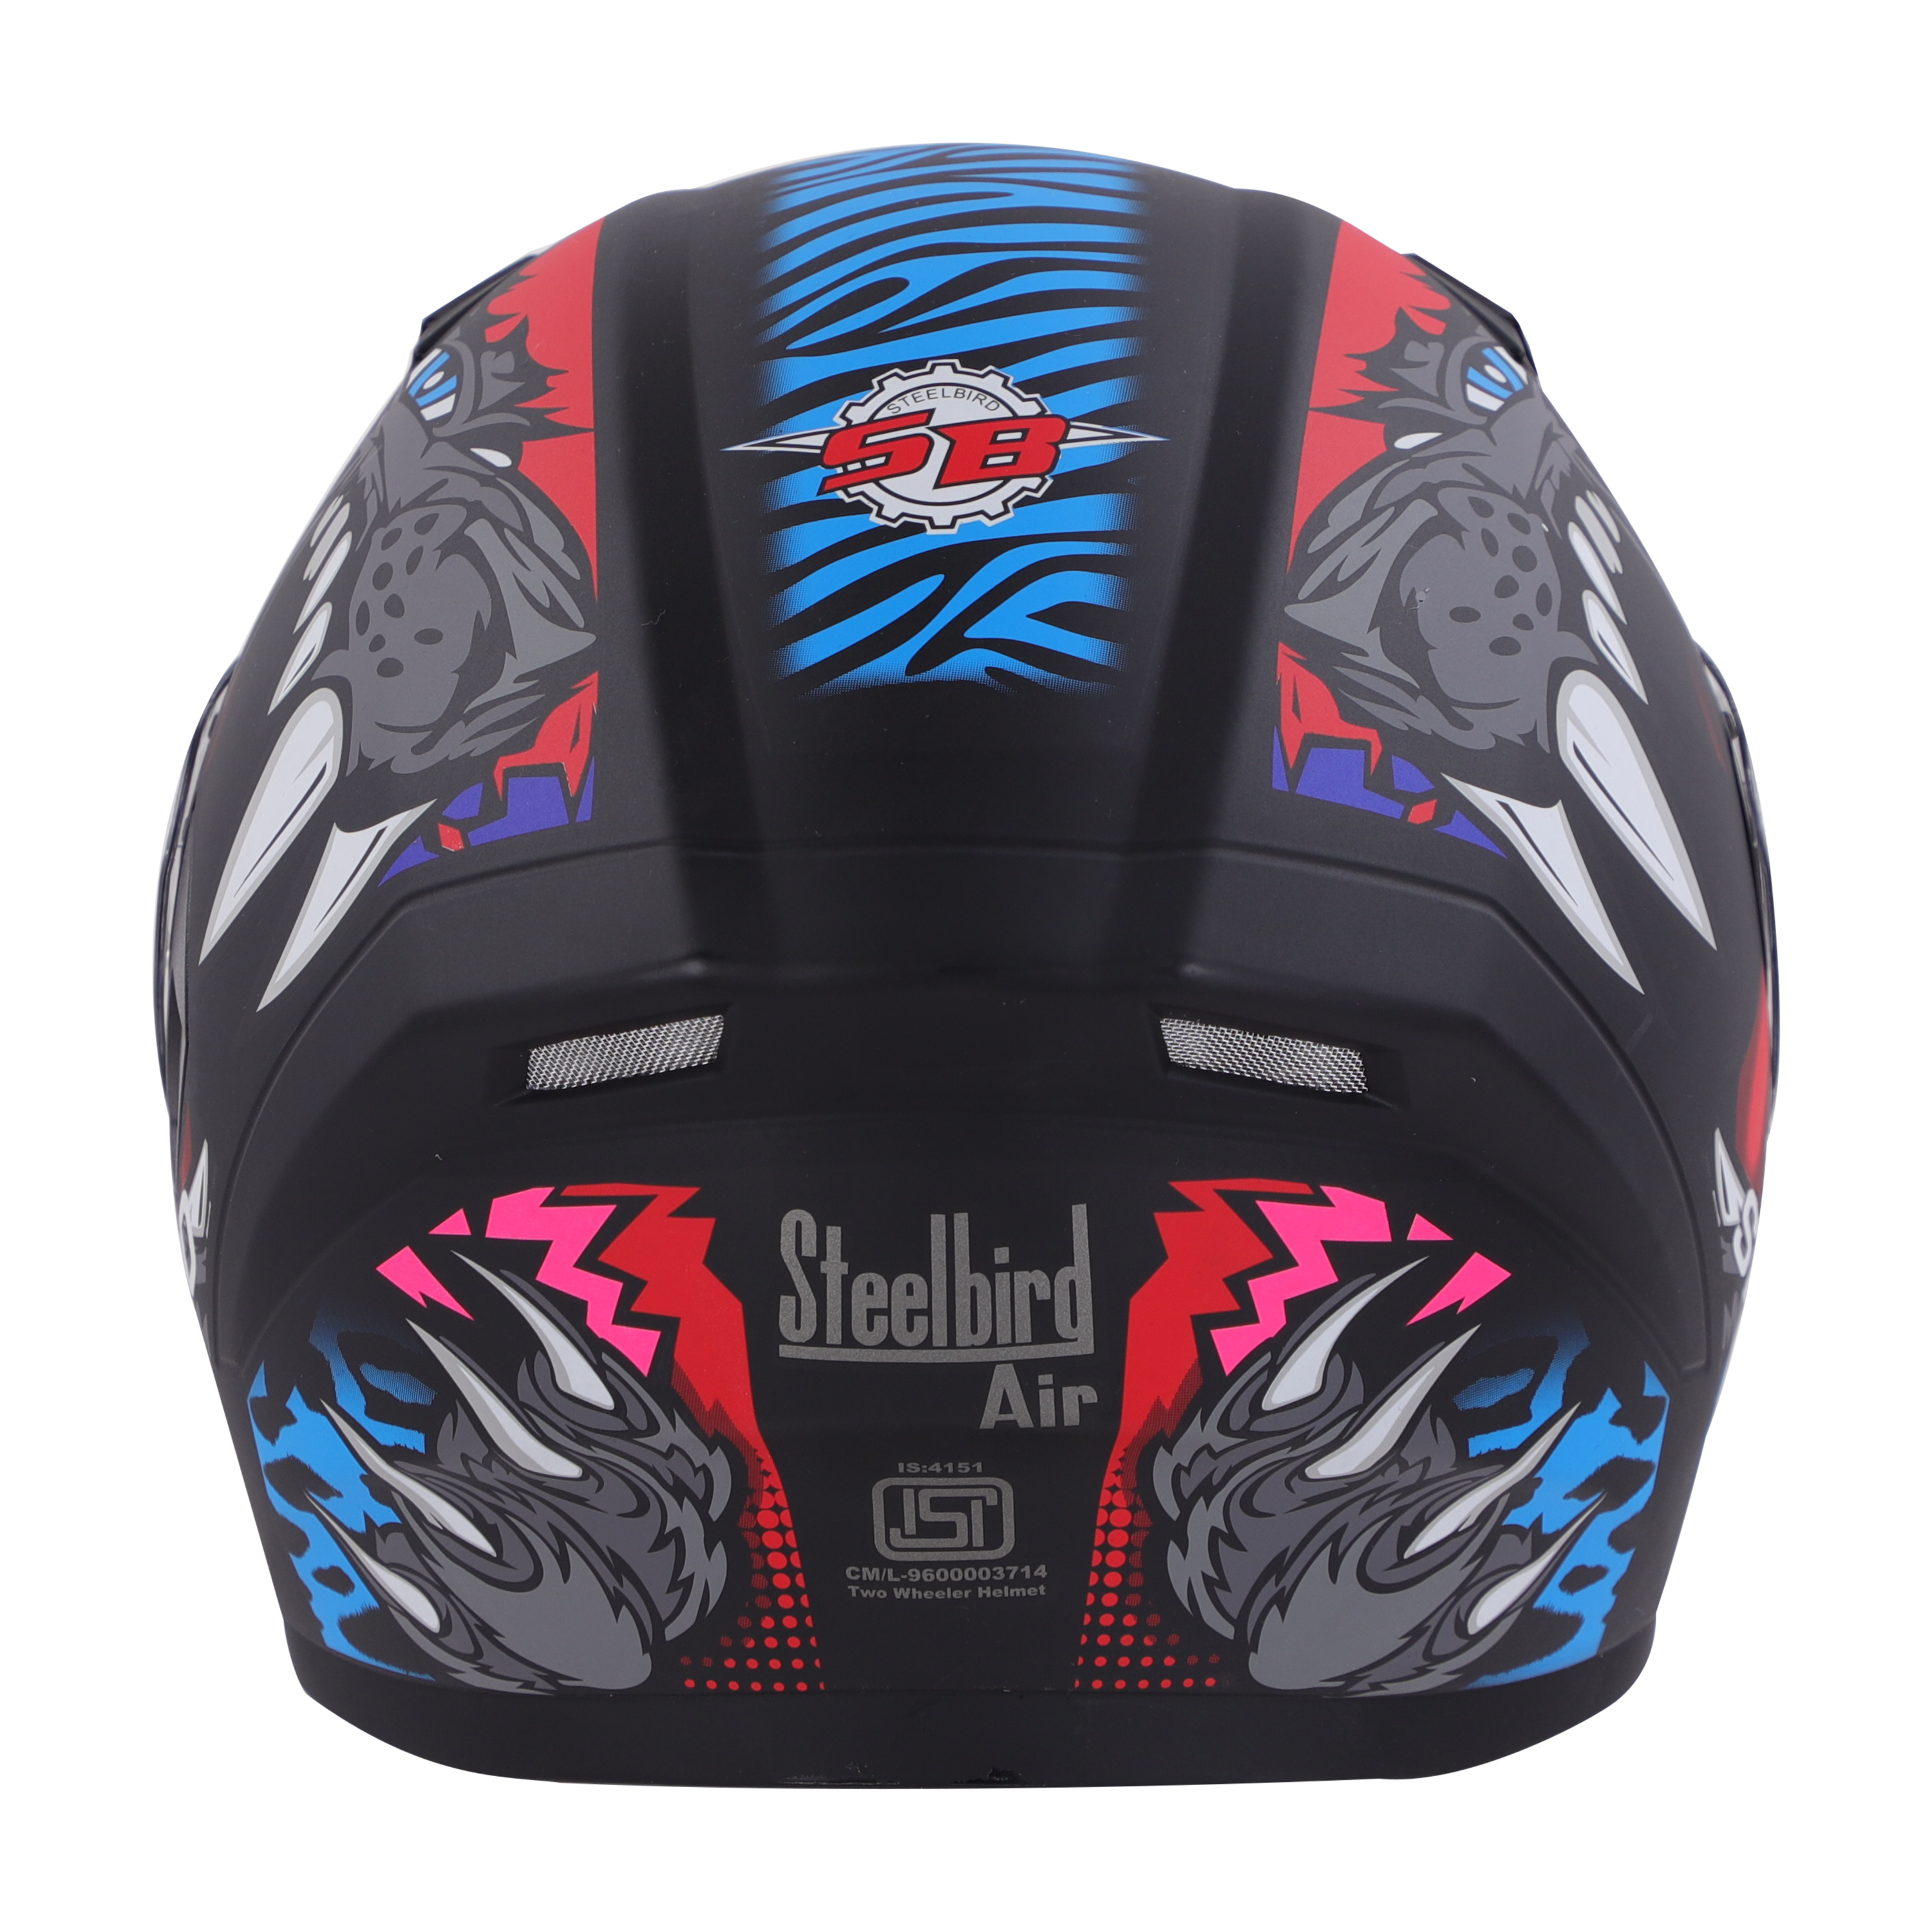 SBA-21 PANTHA GLOSSY BLACK WITH RED/BLUE (WITH LONG CHEEK PAD INTERIOR)